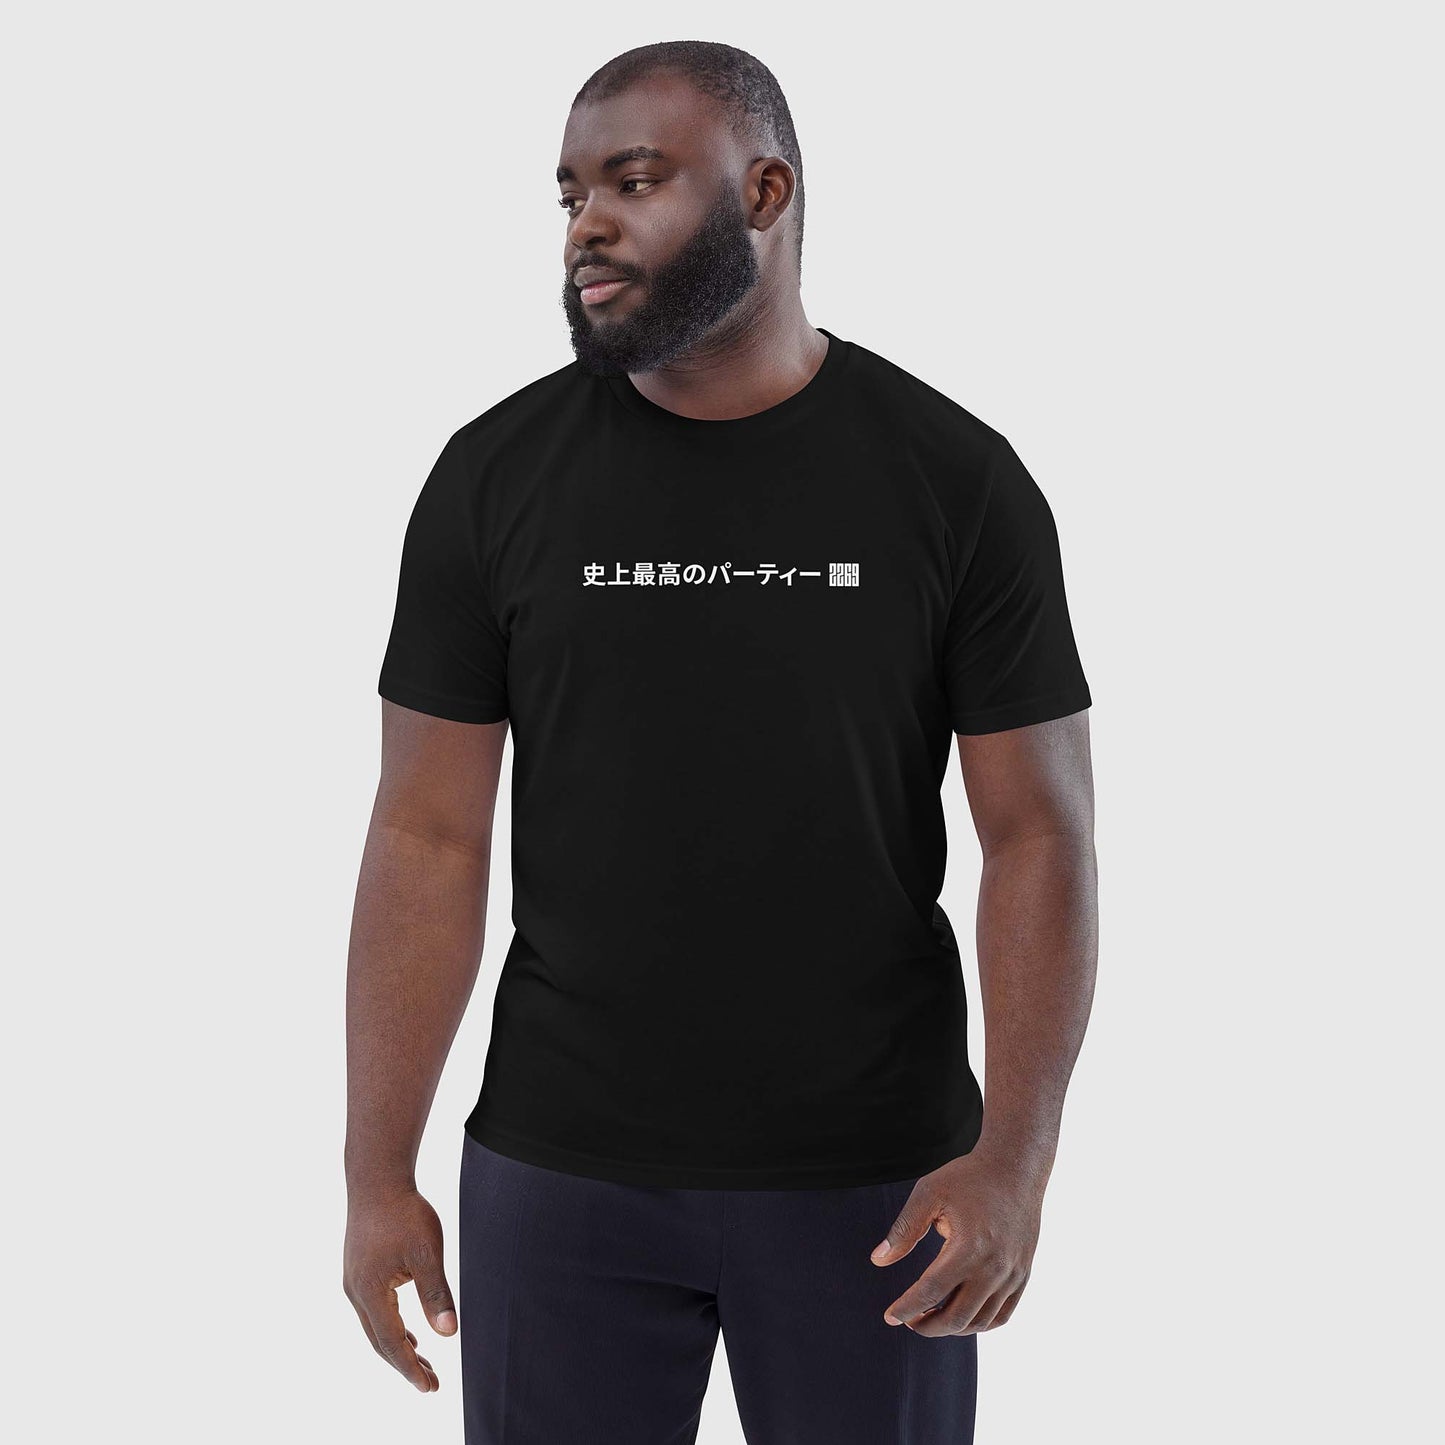 Men's black organic cotton t-shirt with Japanese 2269 party message